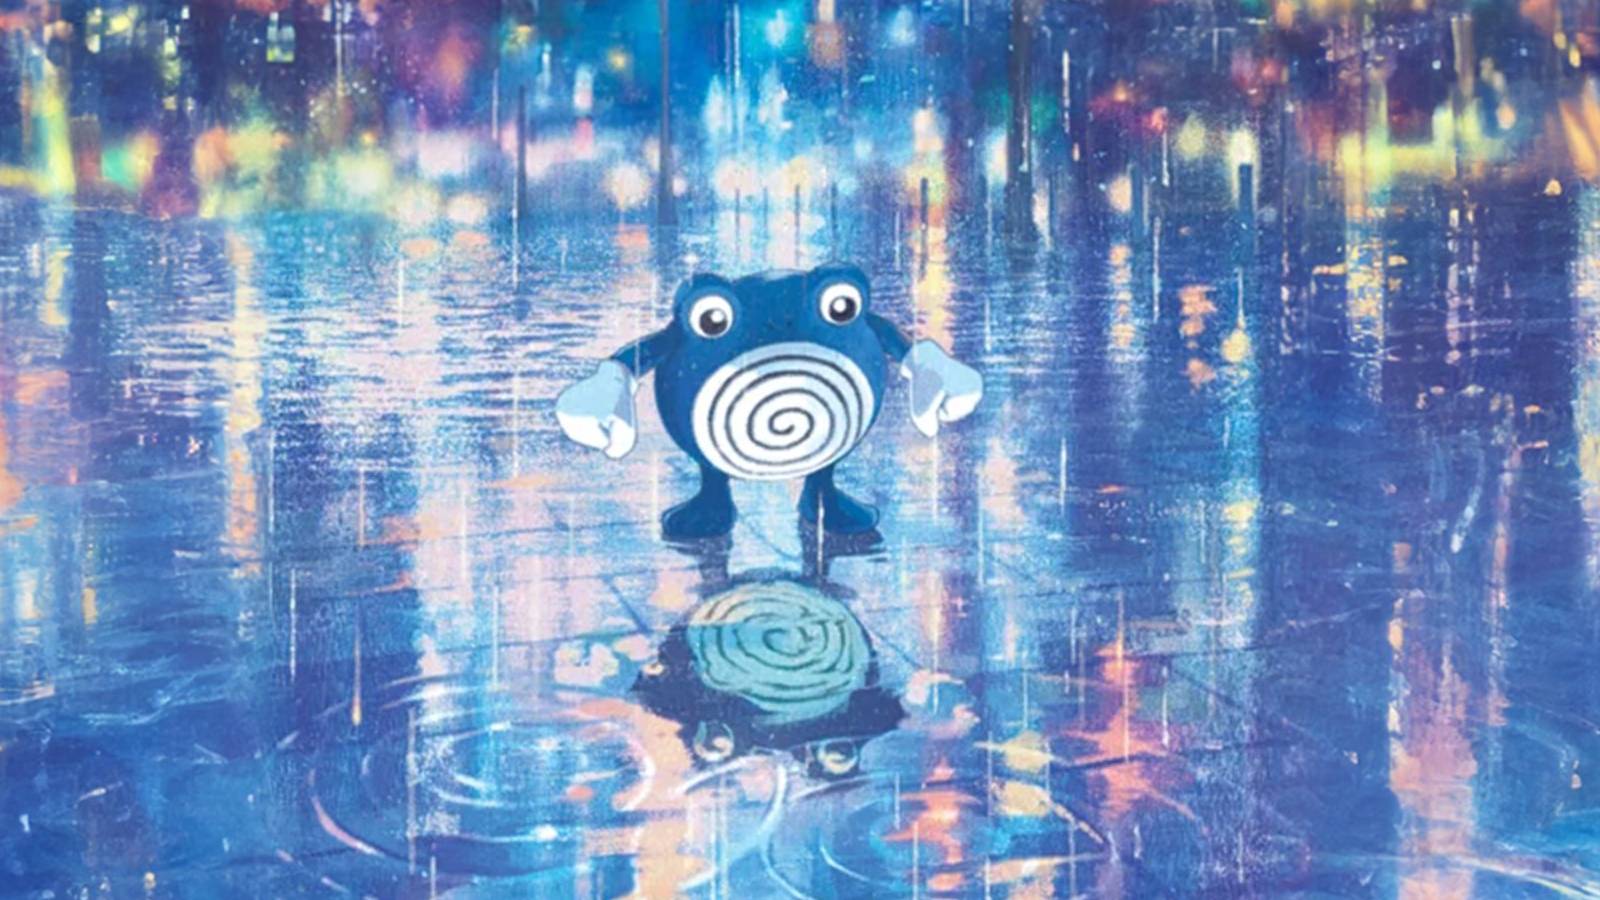 Artwork from the Pokemon TCG shows a Poliwhirl looking down into a puddle